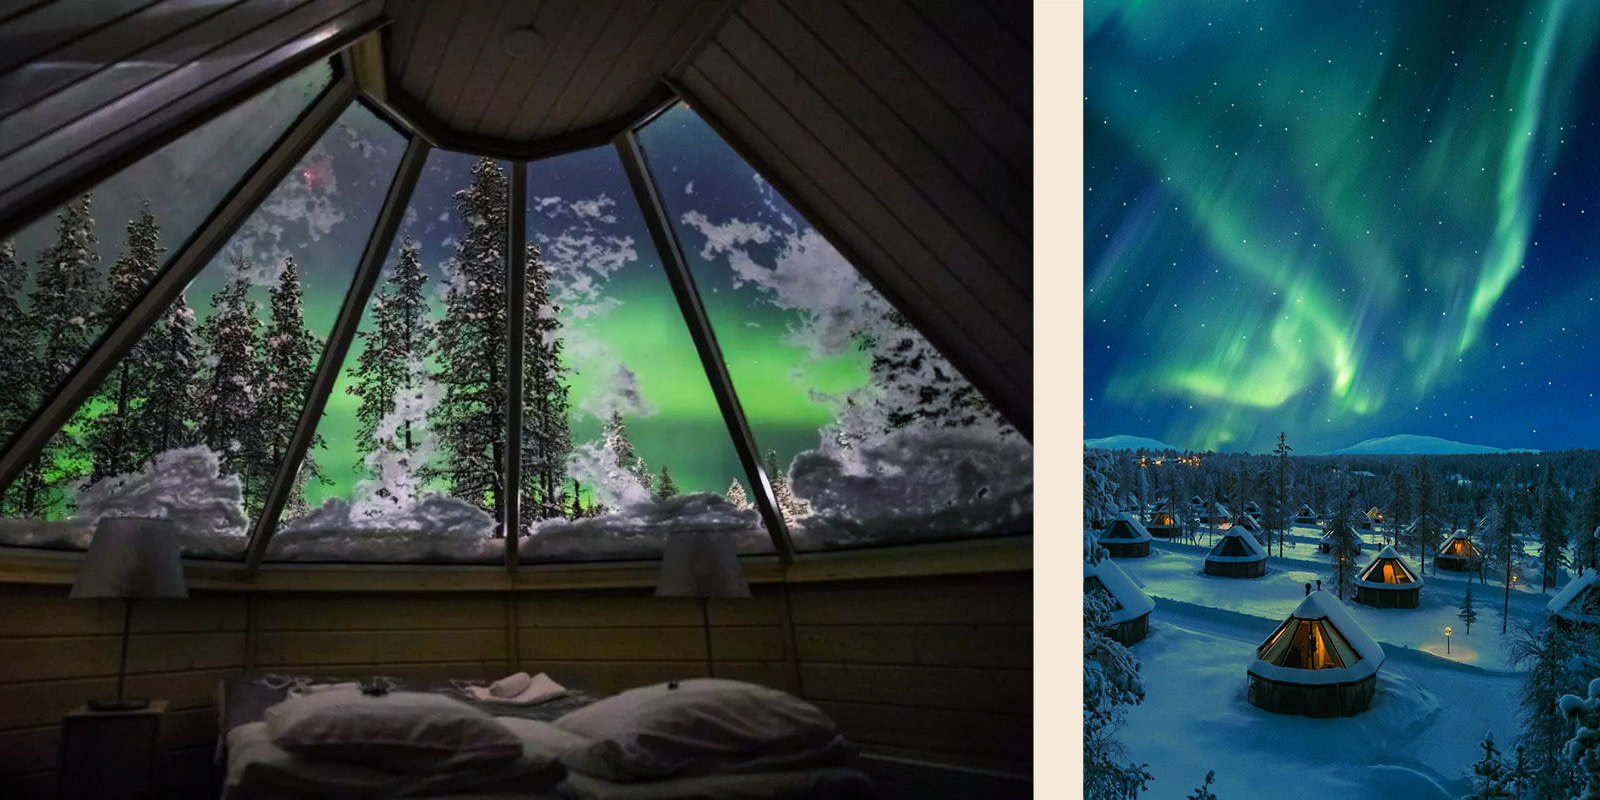 See the northern lights in this romantic glamping destination in Finland